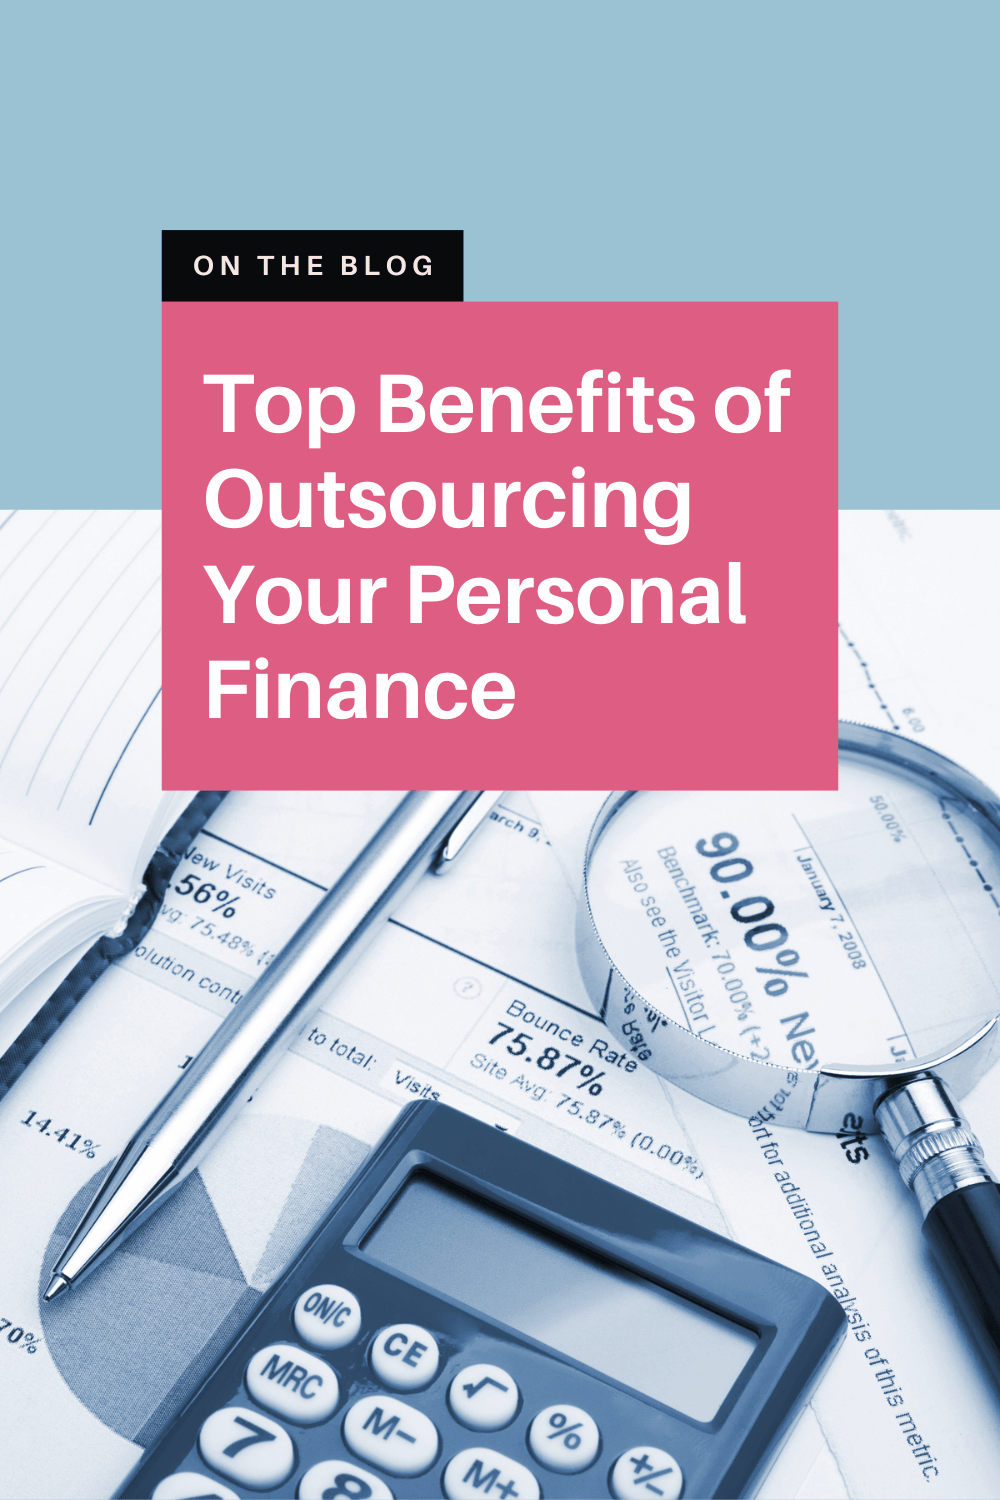 Top Benefits of Outsourcing Your Personal Finance